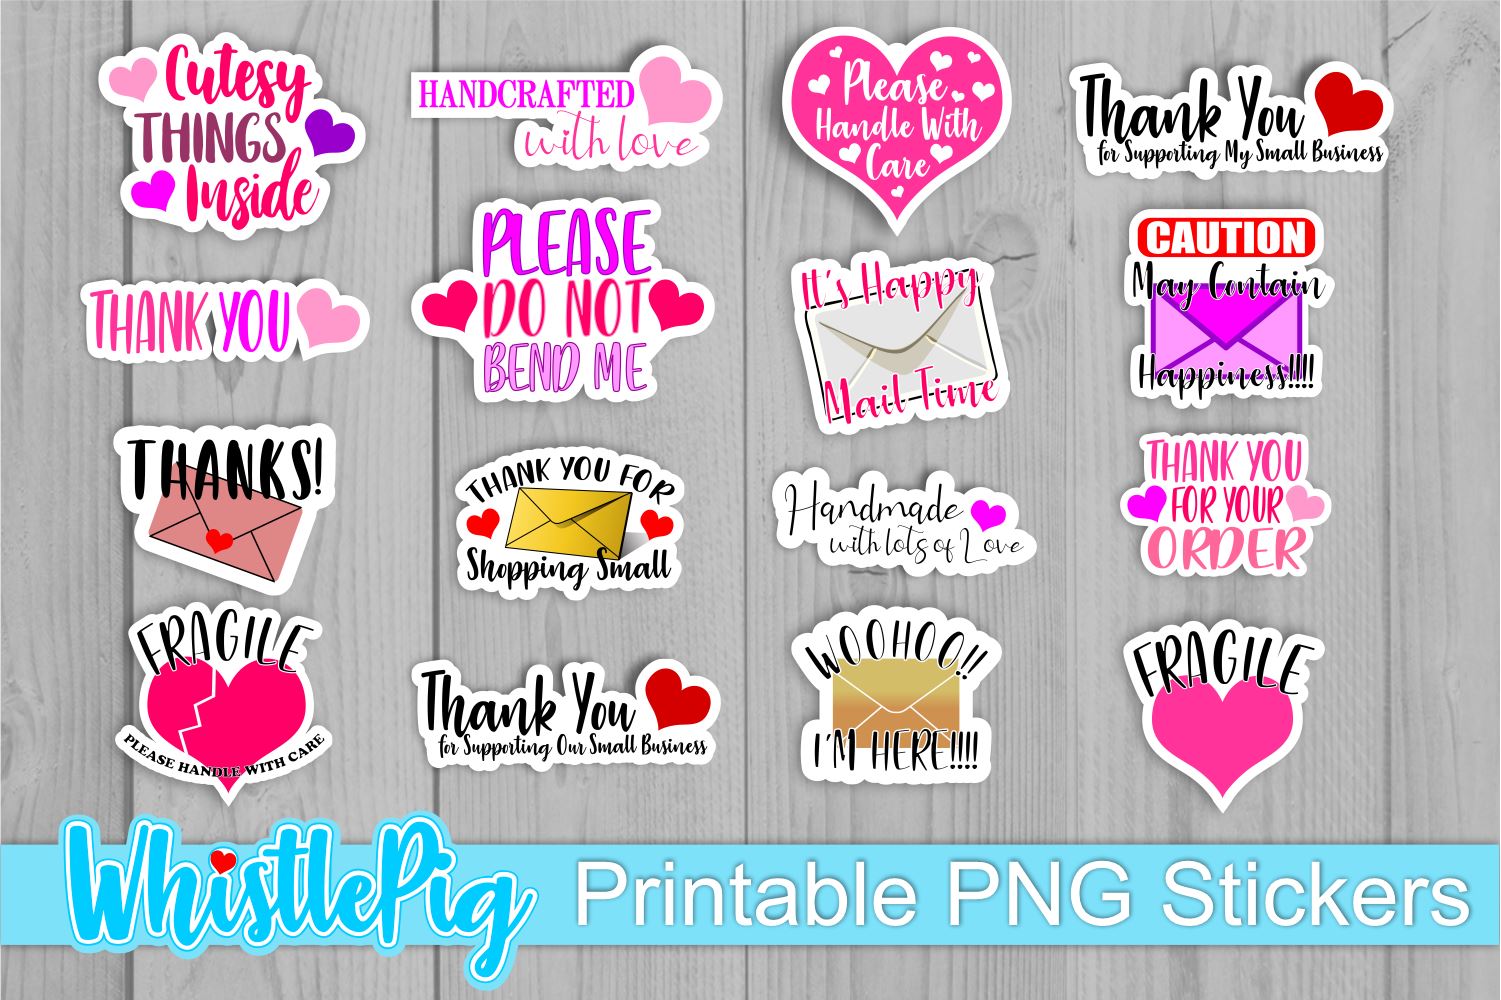 Small Business Sticker Bundle Print And Cut Stickers Thank You Stickers Craft Business Stickers Craft Business Mail Stickers Craft Mail So Fontsy